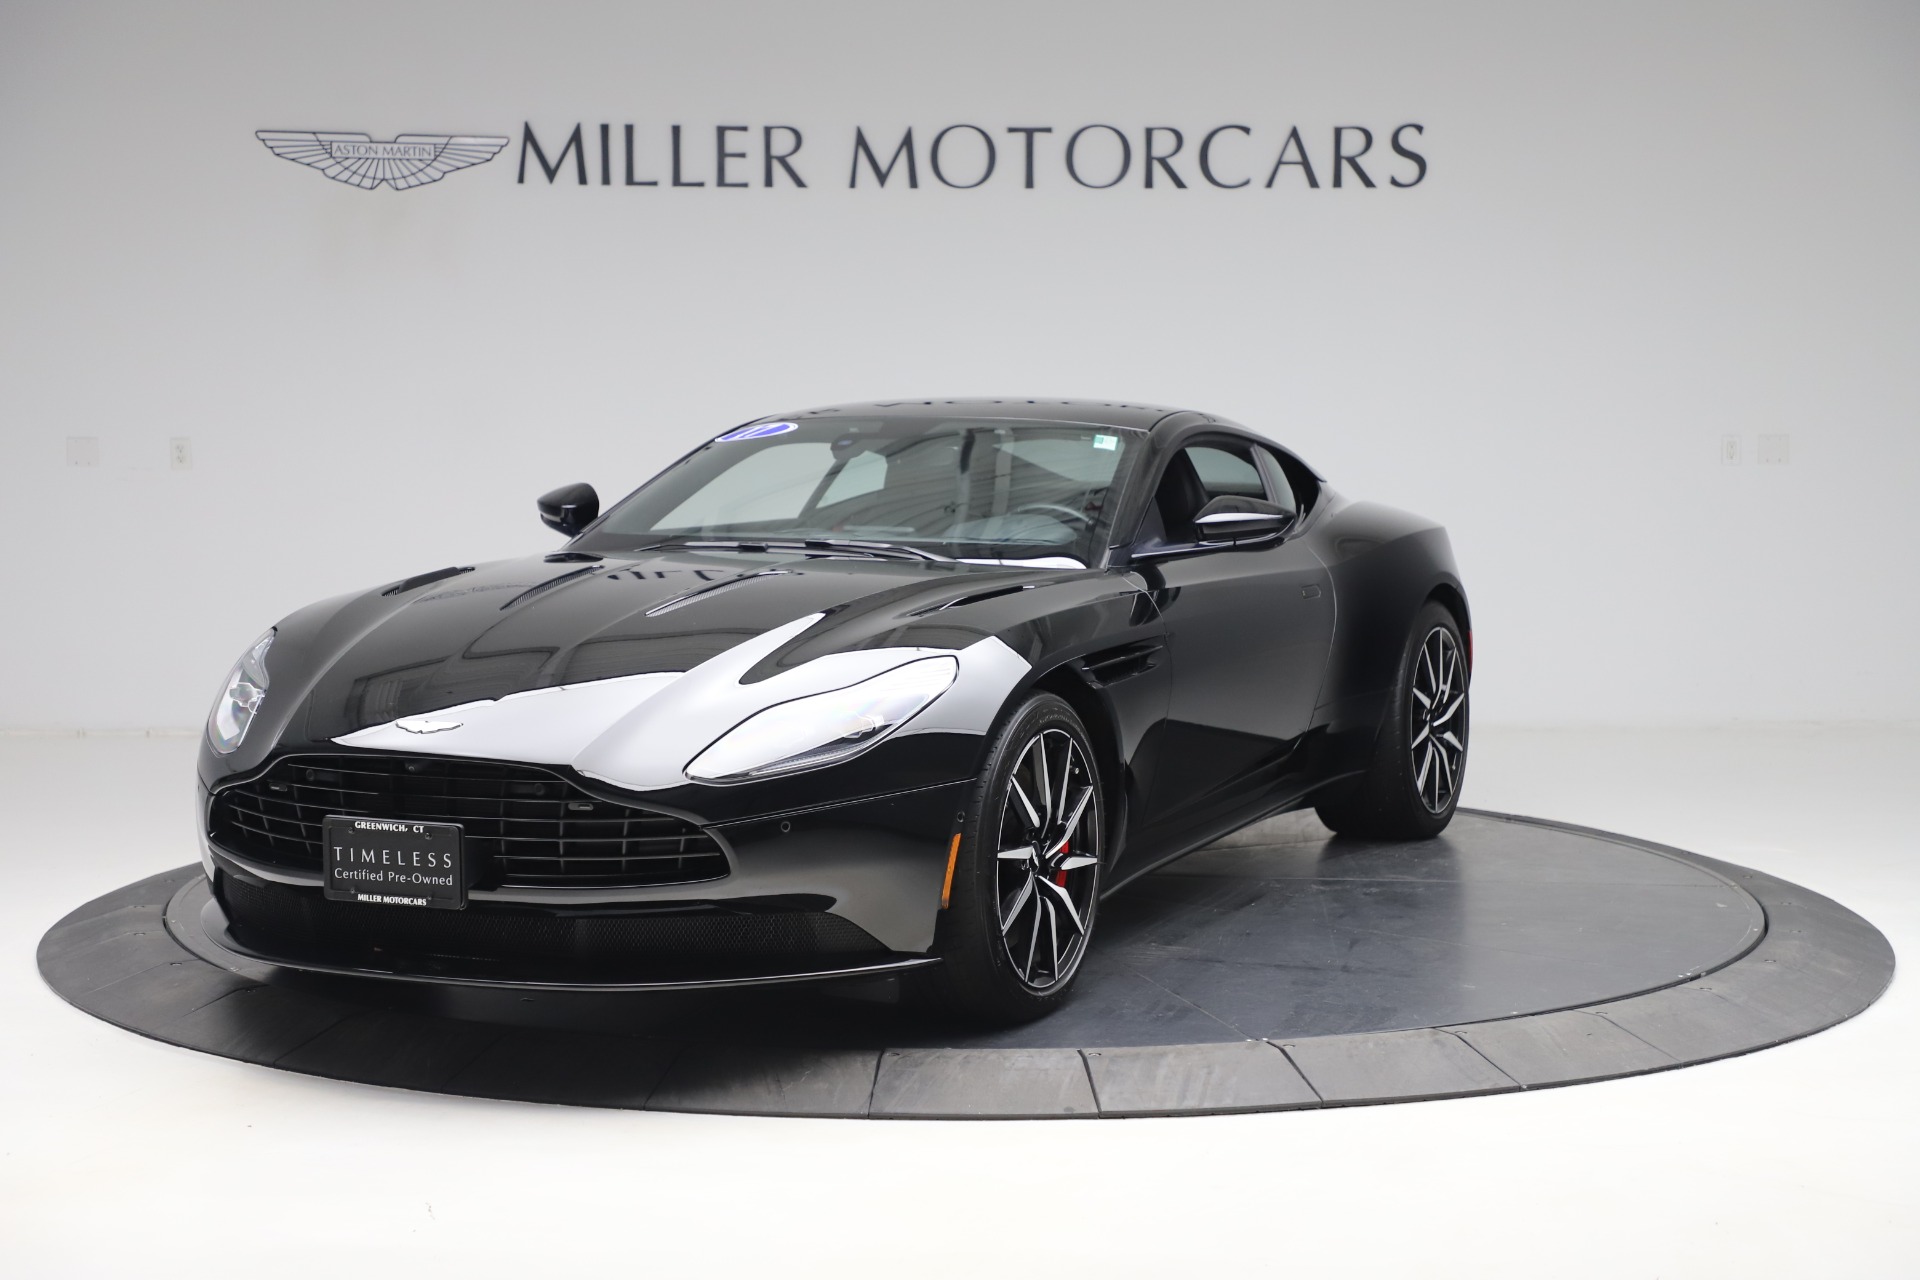 Used 2017 Aston Martin DB11 V12 Coupe for sale Sold at Aston Martin of Greenwich in Greenwich CT 06830 1